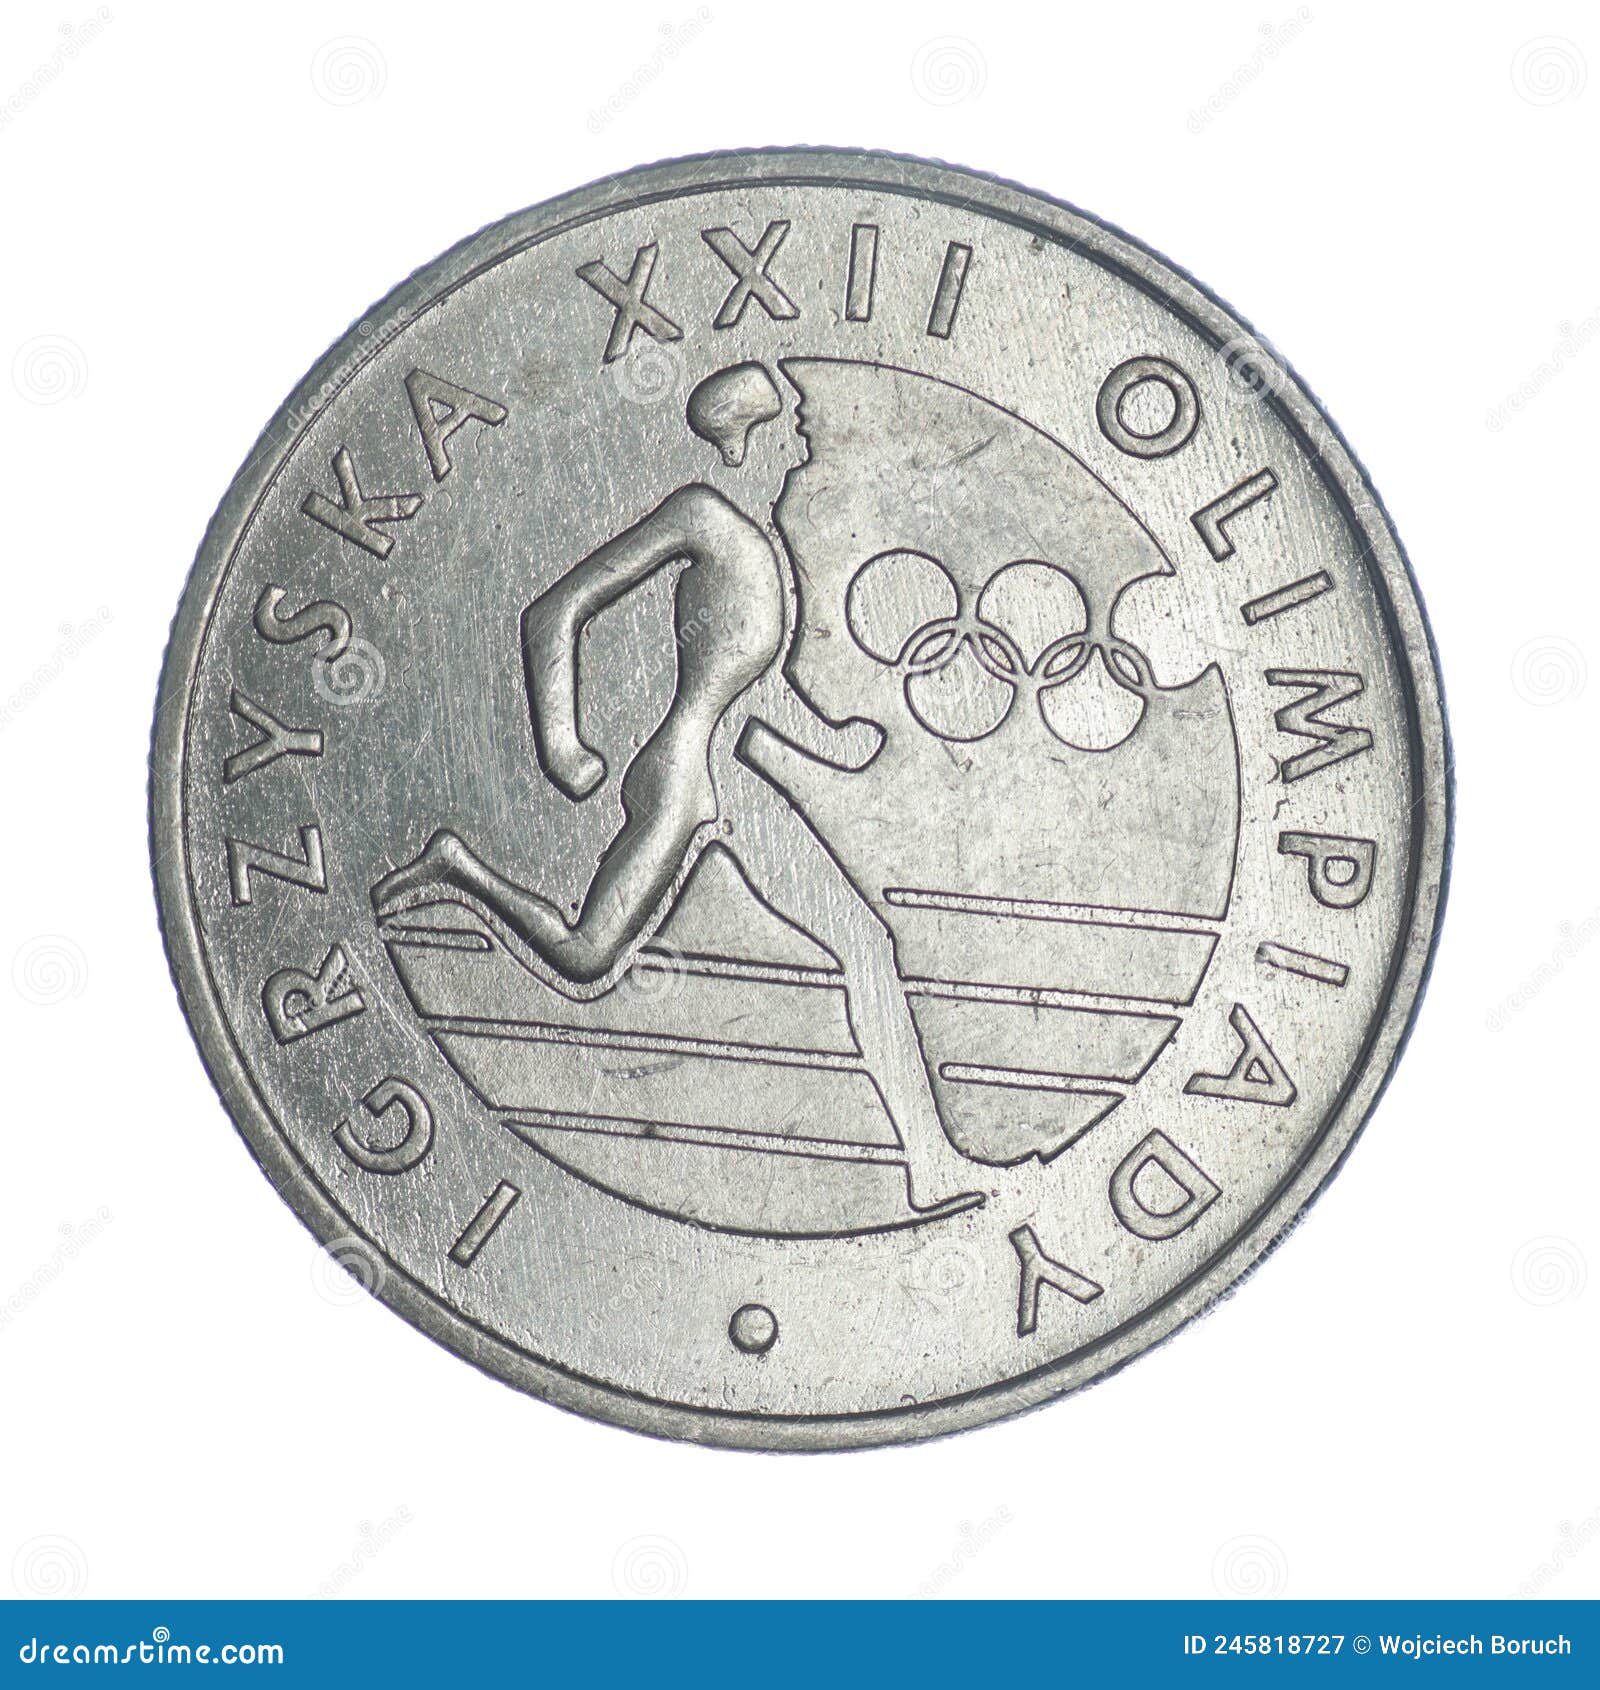 20 zlotys - games of the xxii olympiad - 1980